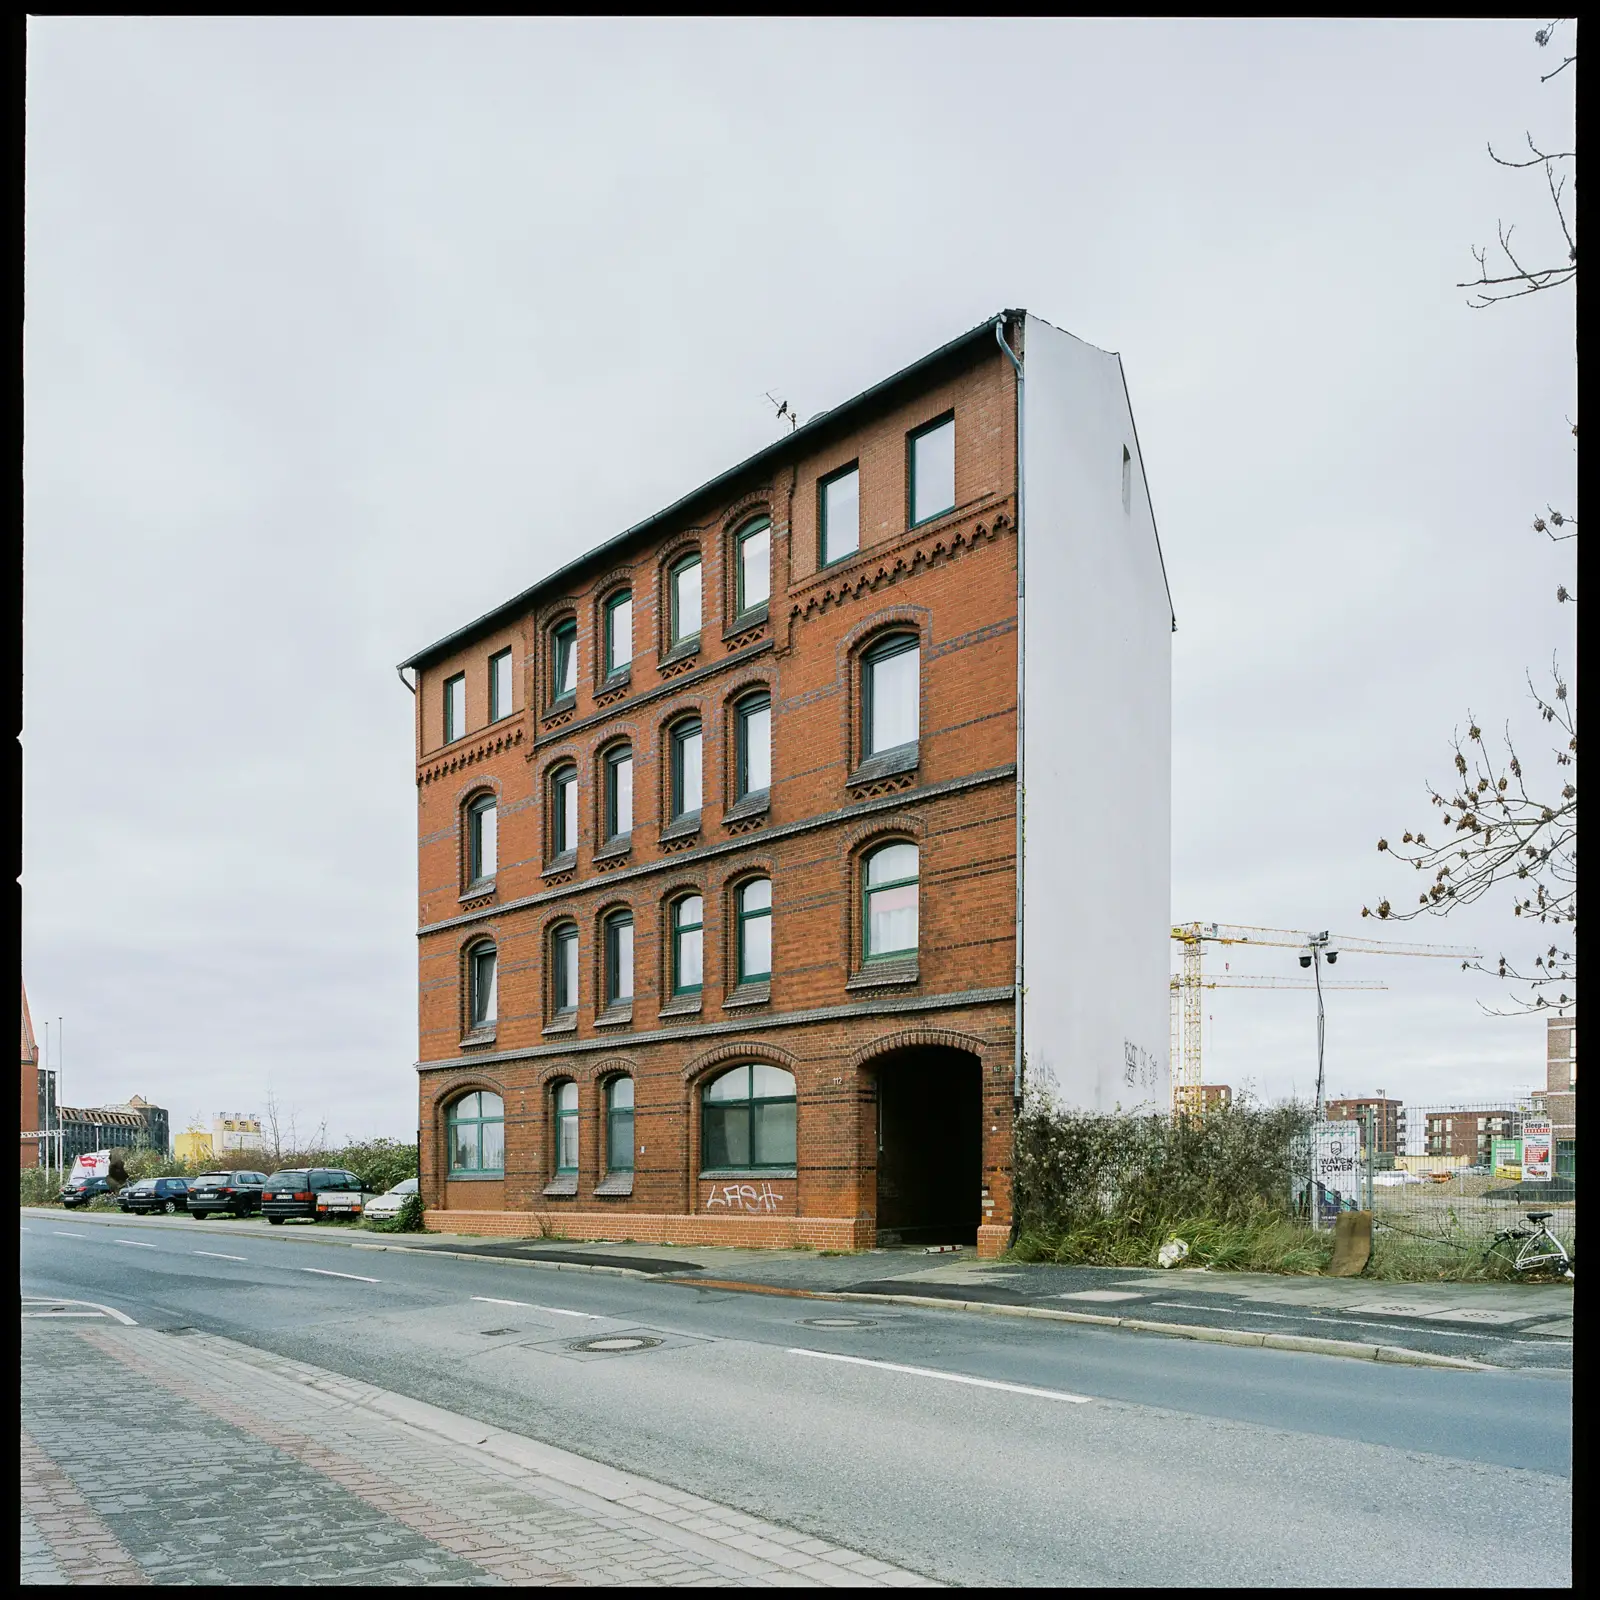 6x6 photograph of a run-down apartment house made out of red bricks